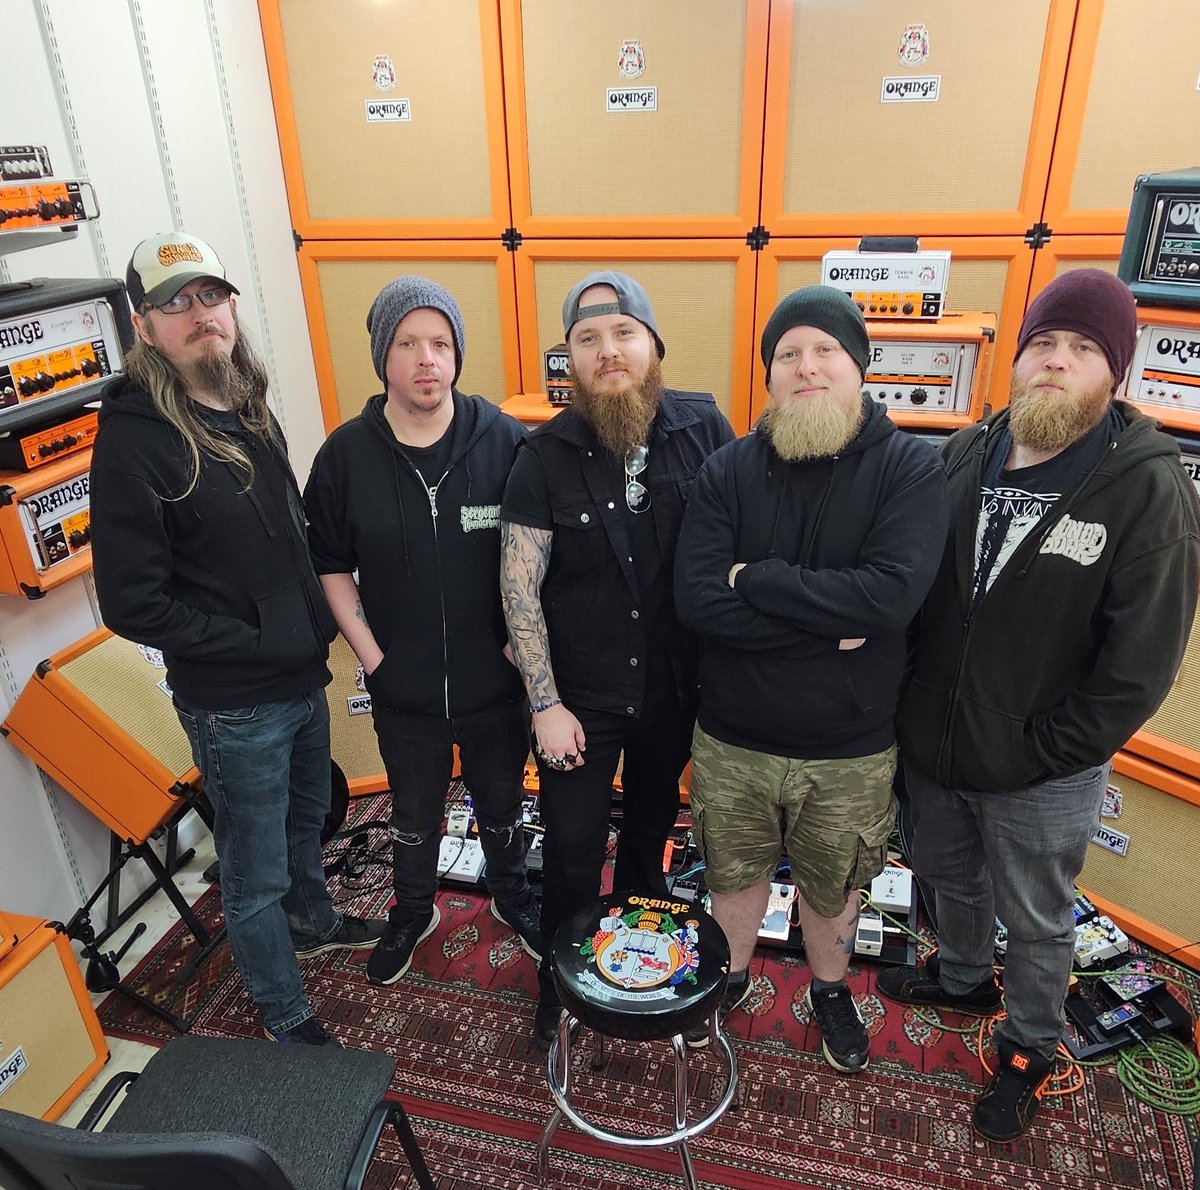 Introducing: @Son_Of_Boar Hailing from the hazy wastelands of the industrial North, Son of Boar bring their own brand of ‘Boarberic’ stoner/doom ladened music to proceedings. Click the link below to learn more about Son of Son of Boar: orangeamps.com/articles/sonof…